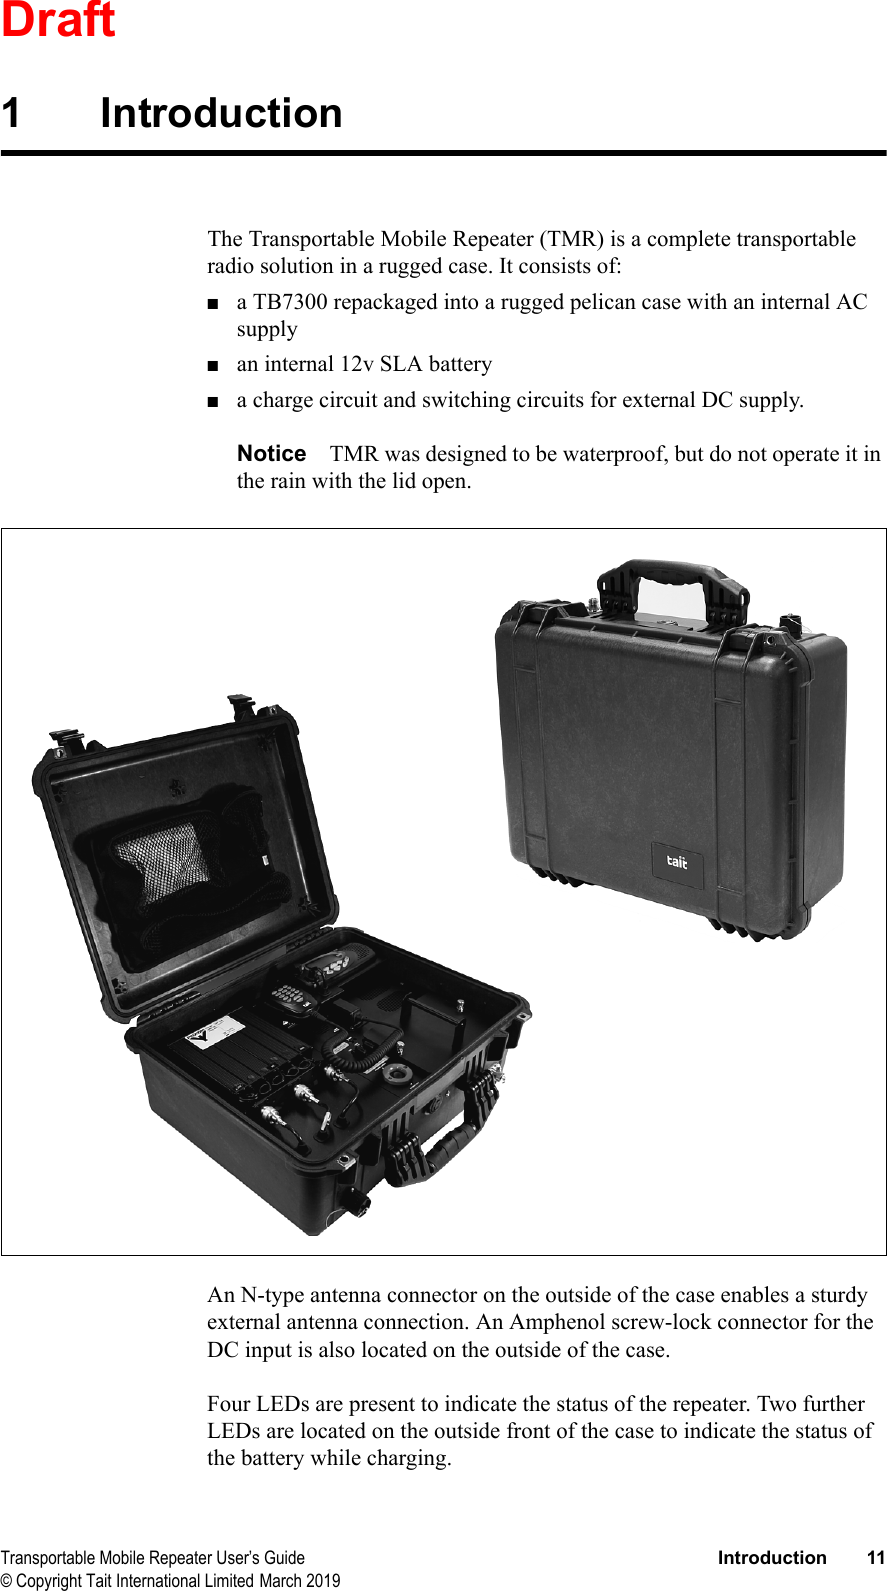 DraftTransportable Mobile Repeater User’s Guide Introduction 11© Copyright Tait International Limited March 20191IntroductionThe Transportable Mobile Repeater (TMR) is a complete transportable radio solution in a rugged case. It consists of:■a TB7300 repackaged into a rugged pelican case with an internal AC supply■an internal 12v SLA battery■a charge circuit and switching circuits for external DC supply.Notice TMR was designed to be waterproof, but do not operate it in the rain with the lid open.An N-type antenna connector on the outside of the case enables a sturdy external antenna connection. An Amphenol screw-lock connector for the DC input is also located on the outside of the case.Four LEDs are present to indicate the status of the repeater. Two further LEDs are located on the outside front of the case to indicate the status of the battery while charging.